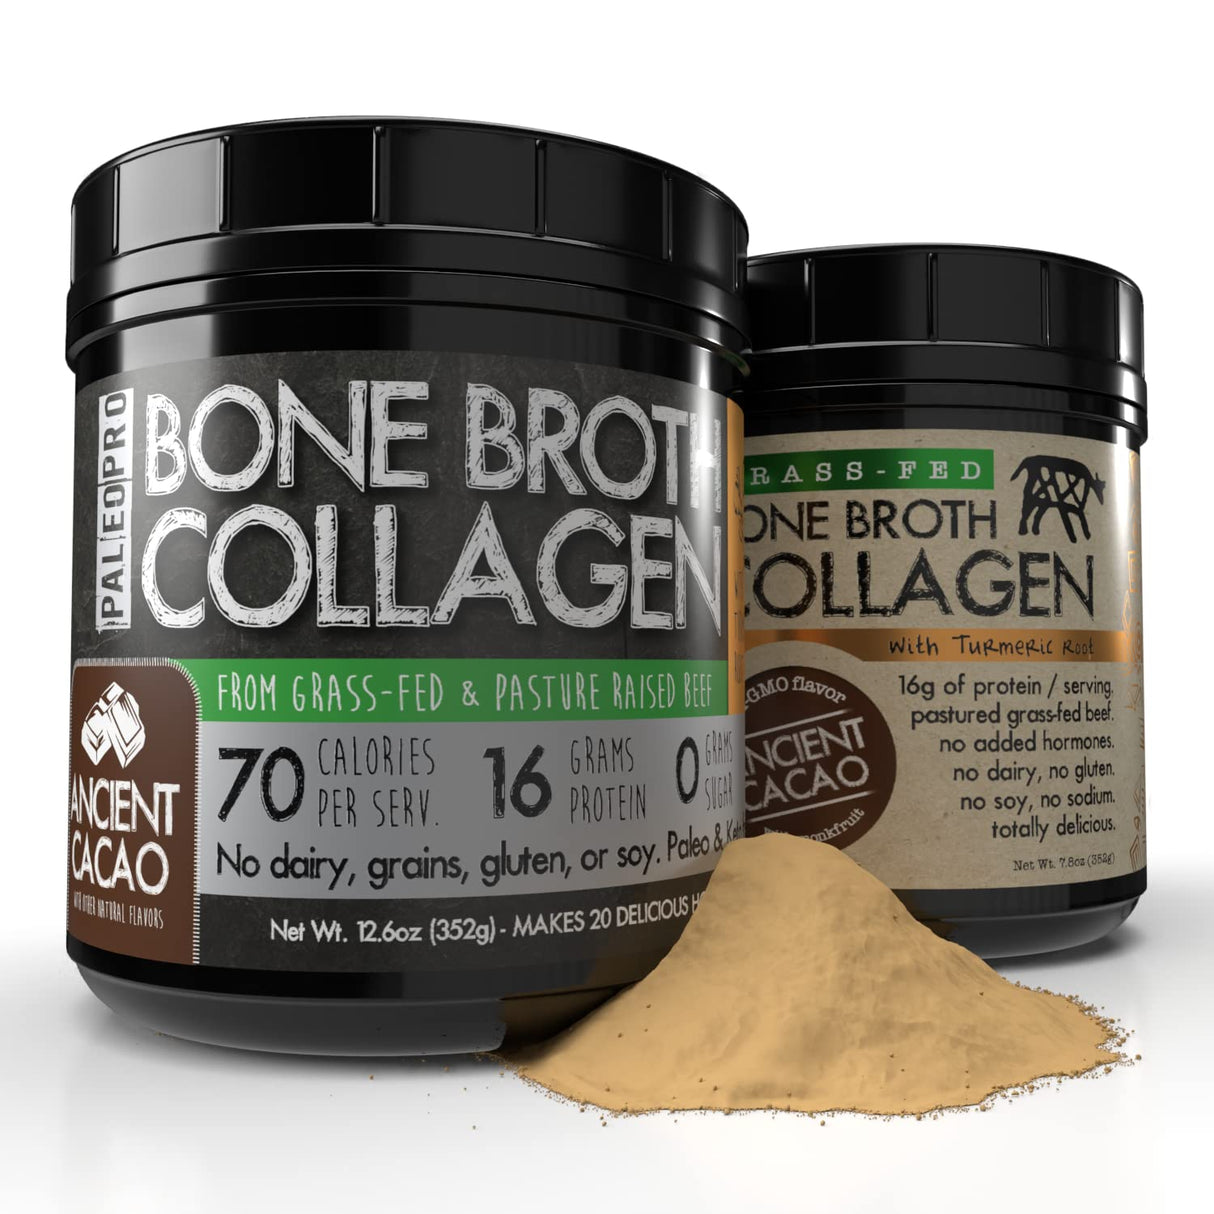 PaleoPro Bone Broth Collagen w/Turmeric Root (Ancient Cacao) Grass-Fed & Pastured Beef Collagen | Gluten Free, Dairy Free, No Sugar, Soy, Grains or Net Carbs |Paleo & Keto Friendly (20 Servings)